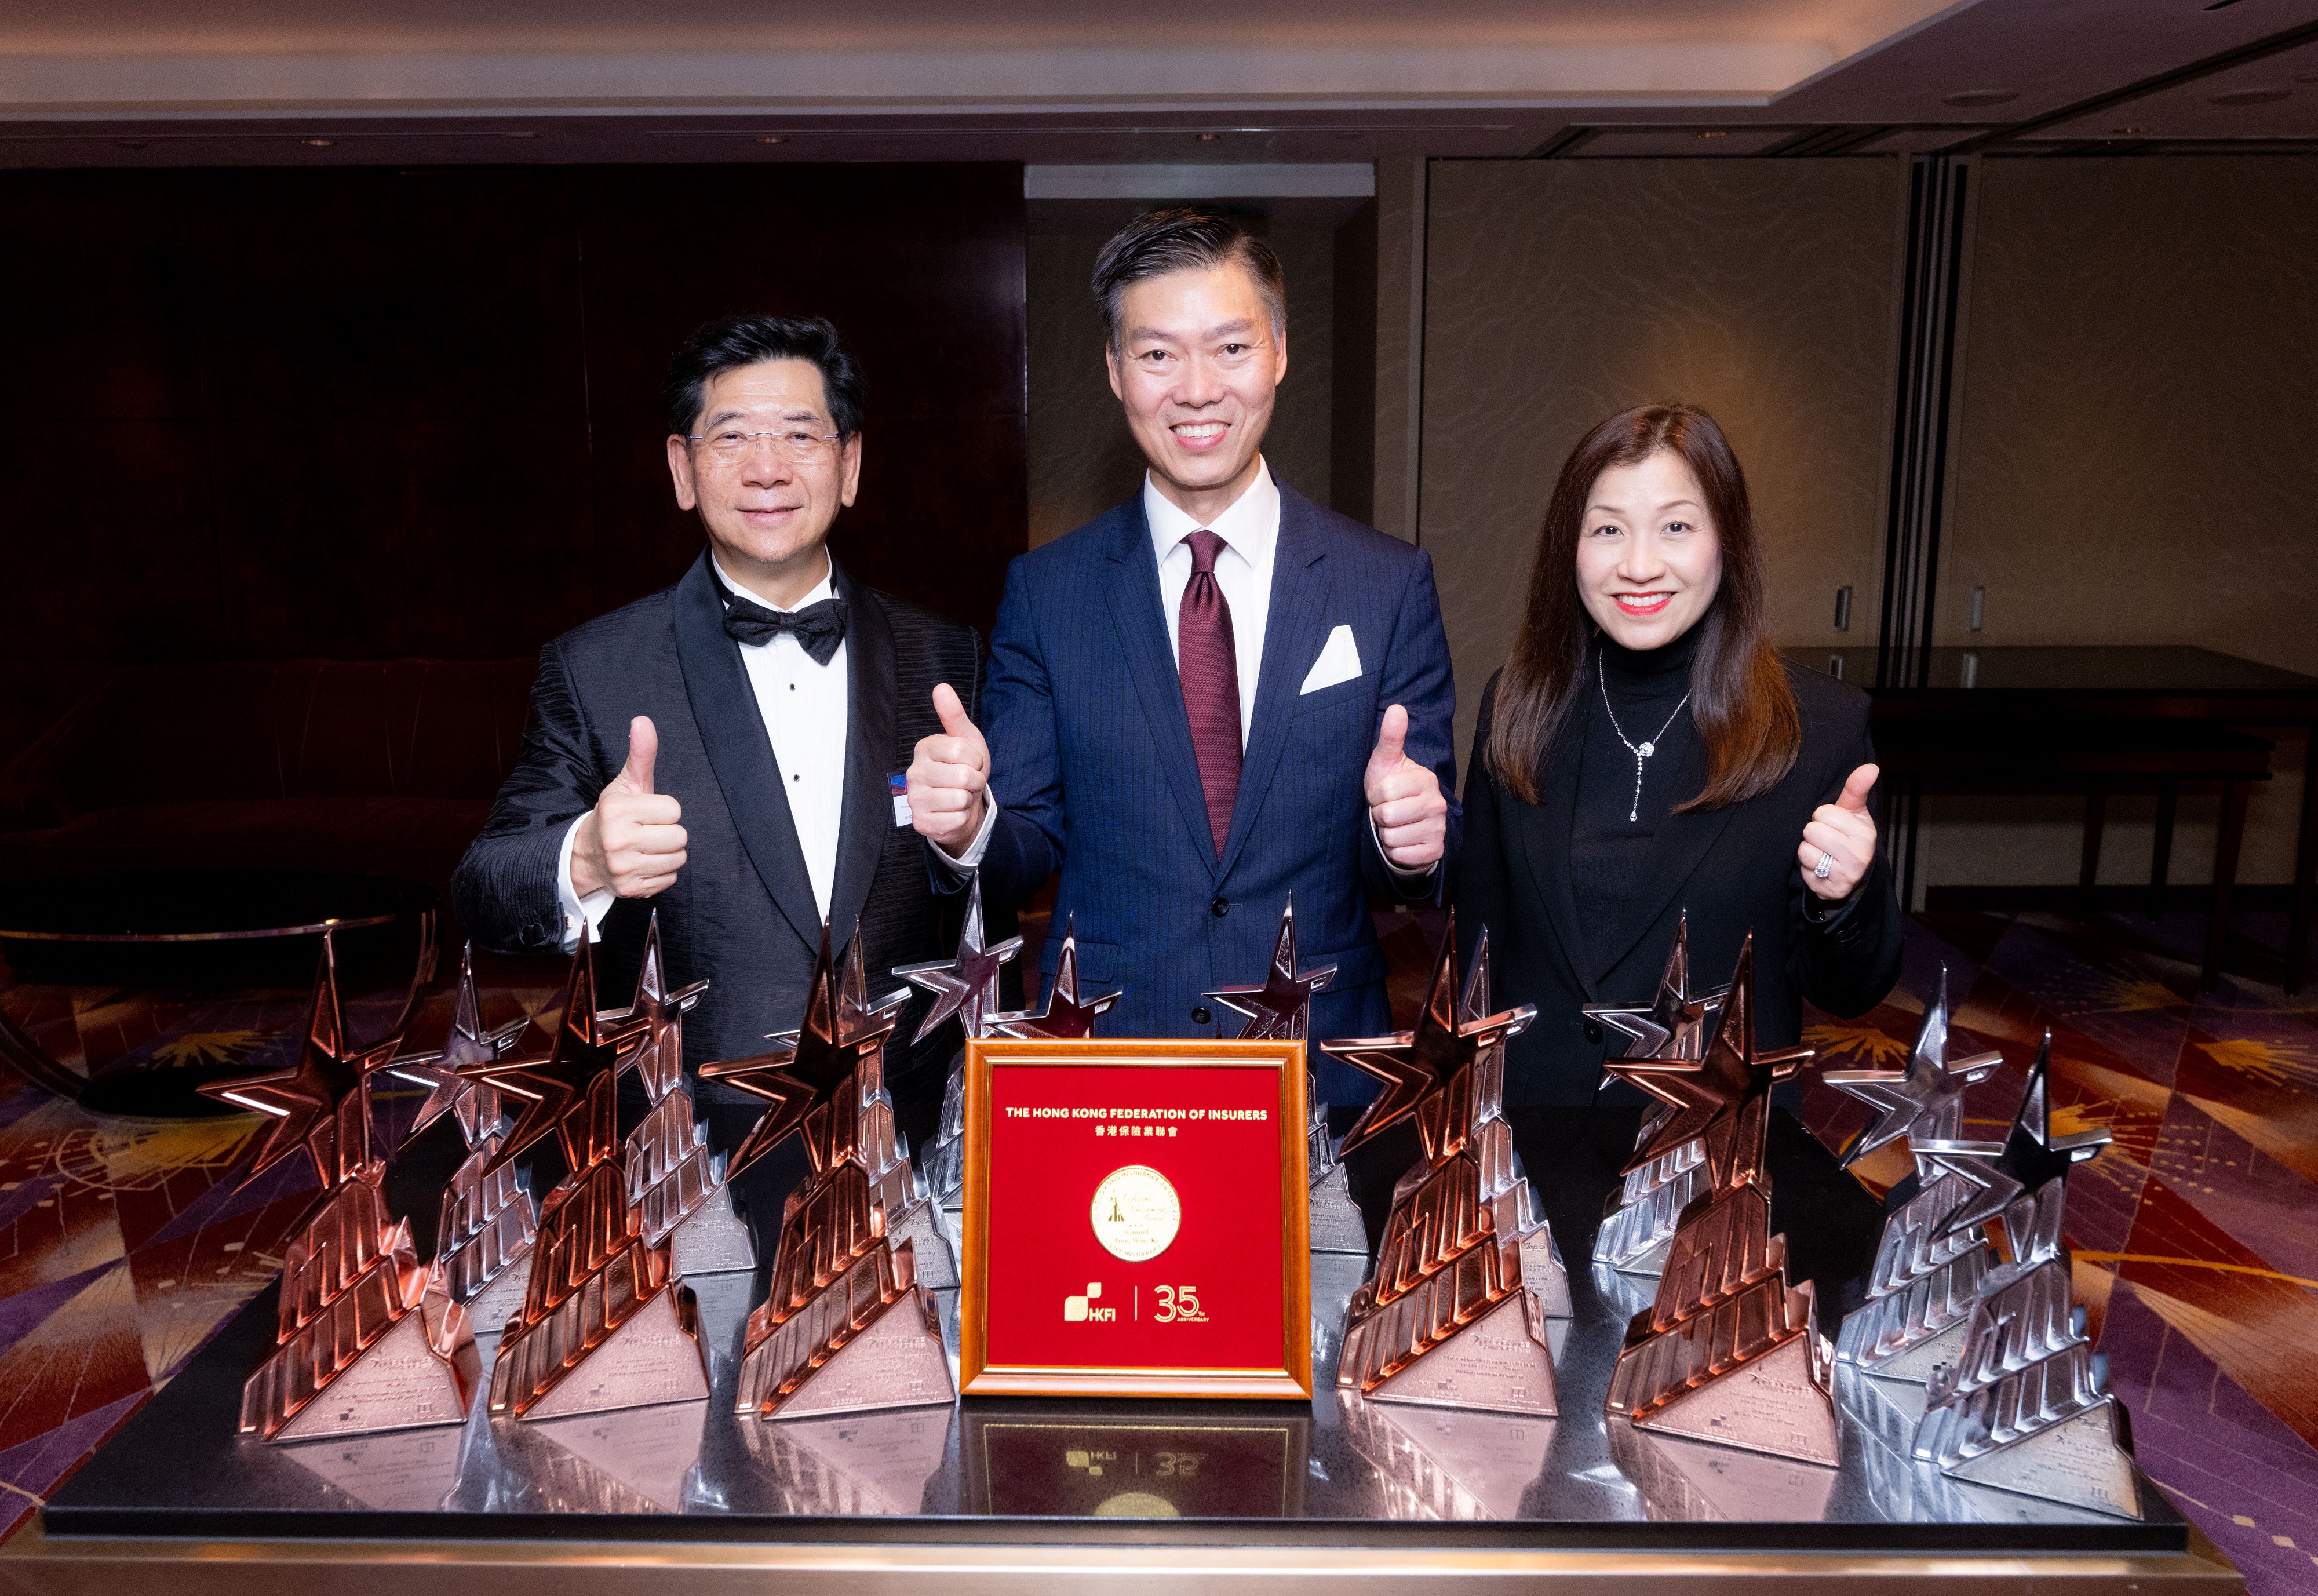 (From left to right) Mr. Samuel Yung, Executive District Director and Honourable Advisor of AIA Hong Kong; Mr. Alger Fung, Chief Executive Officer of AIA Hong Kong & Macau; and Ms. Bonnie Tse, Chief Executive Officer of Blue Cross, receive multiple honours at the “Hong Kong Insurance Awards 2023”.